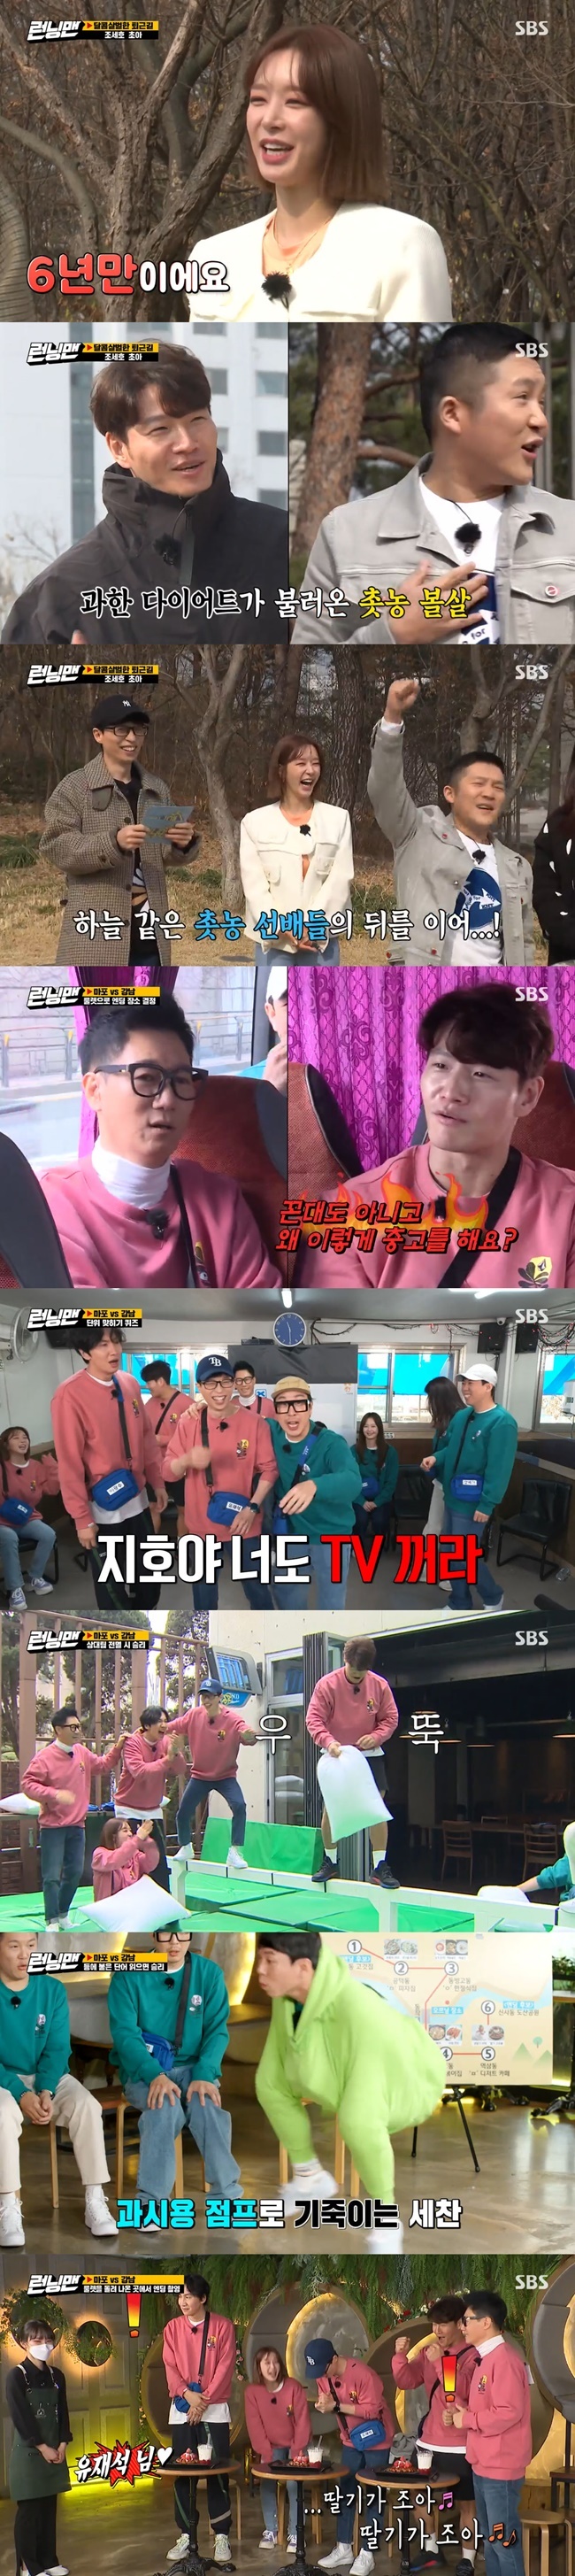 A regular guest Jo Se-ho and a welcome face Park Choa have found Running Man.On April 11, SBS Running Man, Jo Se-ho, a broadcaster, and Park Choa appeared on a short work route and played a dizzying race.When Jo Se-ho, who lost 30kg as a guest on the day, appeared, the members teased it as candlestick.Park Choa then returned to Running Man after about six years, and was pleased to see it, with Yoo Jae-Suk saying: The face is the same, its so nice to see you.I keep on doing it, Ive been used to lying down and watching TV for three years, Park Choa said, laughing.Jo Se-ho said, Yesterday, Yoo Jae-Suk called and asked me if I was going to appear on Running Man.I said, Do not you have to appear? I told him that my brother would take care of it. He said, If you come out, you are like a doll.Jo Se-ho also said, Many people want yo-yo, but they are actually keeping it well.In addition, Park Choa was part of the Gangnam District Team and Jo Se-ho was part of the DJ Maphorisa Team.Each team moves one by one in the direction of the winning team according to the result of the mission, so that the team that arrives at the place of departure first takes early work and victory.However, if it is 5 pm, which is the time of work, all missions are stopped and the winner is decided by roulette.In the first mission, the beads first rolled, the Gangnam District team won; while on their way to the next mission site, the members praised Park Choas look got so good.But Ji Suk-jin pointed to Jo Se-ho, saying, Youre not the time to wear luxury goods, just get my house. Kim Jong-kook, who heard this, said, What is it?Is that your belt? he attacked.On the second mission, each teams quiz showdown was held. Lee Kwang-soo and Yang Se-chan, who were considered the weakest, showed unexpected propaganda.On the other hand, Park Choa showed off his unexpected fuss and Yoo Jae-Suk comforted him as fine.Haha also joined the incorrect answer procession and referred to her son as dreamy TV off to cause laughs. Soon after, Yoo Jae-Suk also misrepresented the answer, Jiho, youre TV.My dad works so hard, said Yang Se-chans last-minute performance, which led to the DJ Maphorisa team taking victory.The third mission was a pillow fight on the average; Jeon So-min, considered the weakest, showed propaganda by defeating Ji Suk-jin and Park Choa in turn.But as the members expected, Kim Jong-kook took the victory with a tremendous attack and stable balance.The fourth mission was to open the shellfish first with heat; in turn the members were successful and Jo Se-ho and Lee Kwang-soo were in close contact with each team.After a feverish fang, Lee Kwang-soo succeeded and the Gangnam District team took victory again.